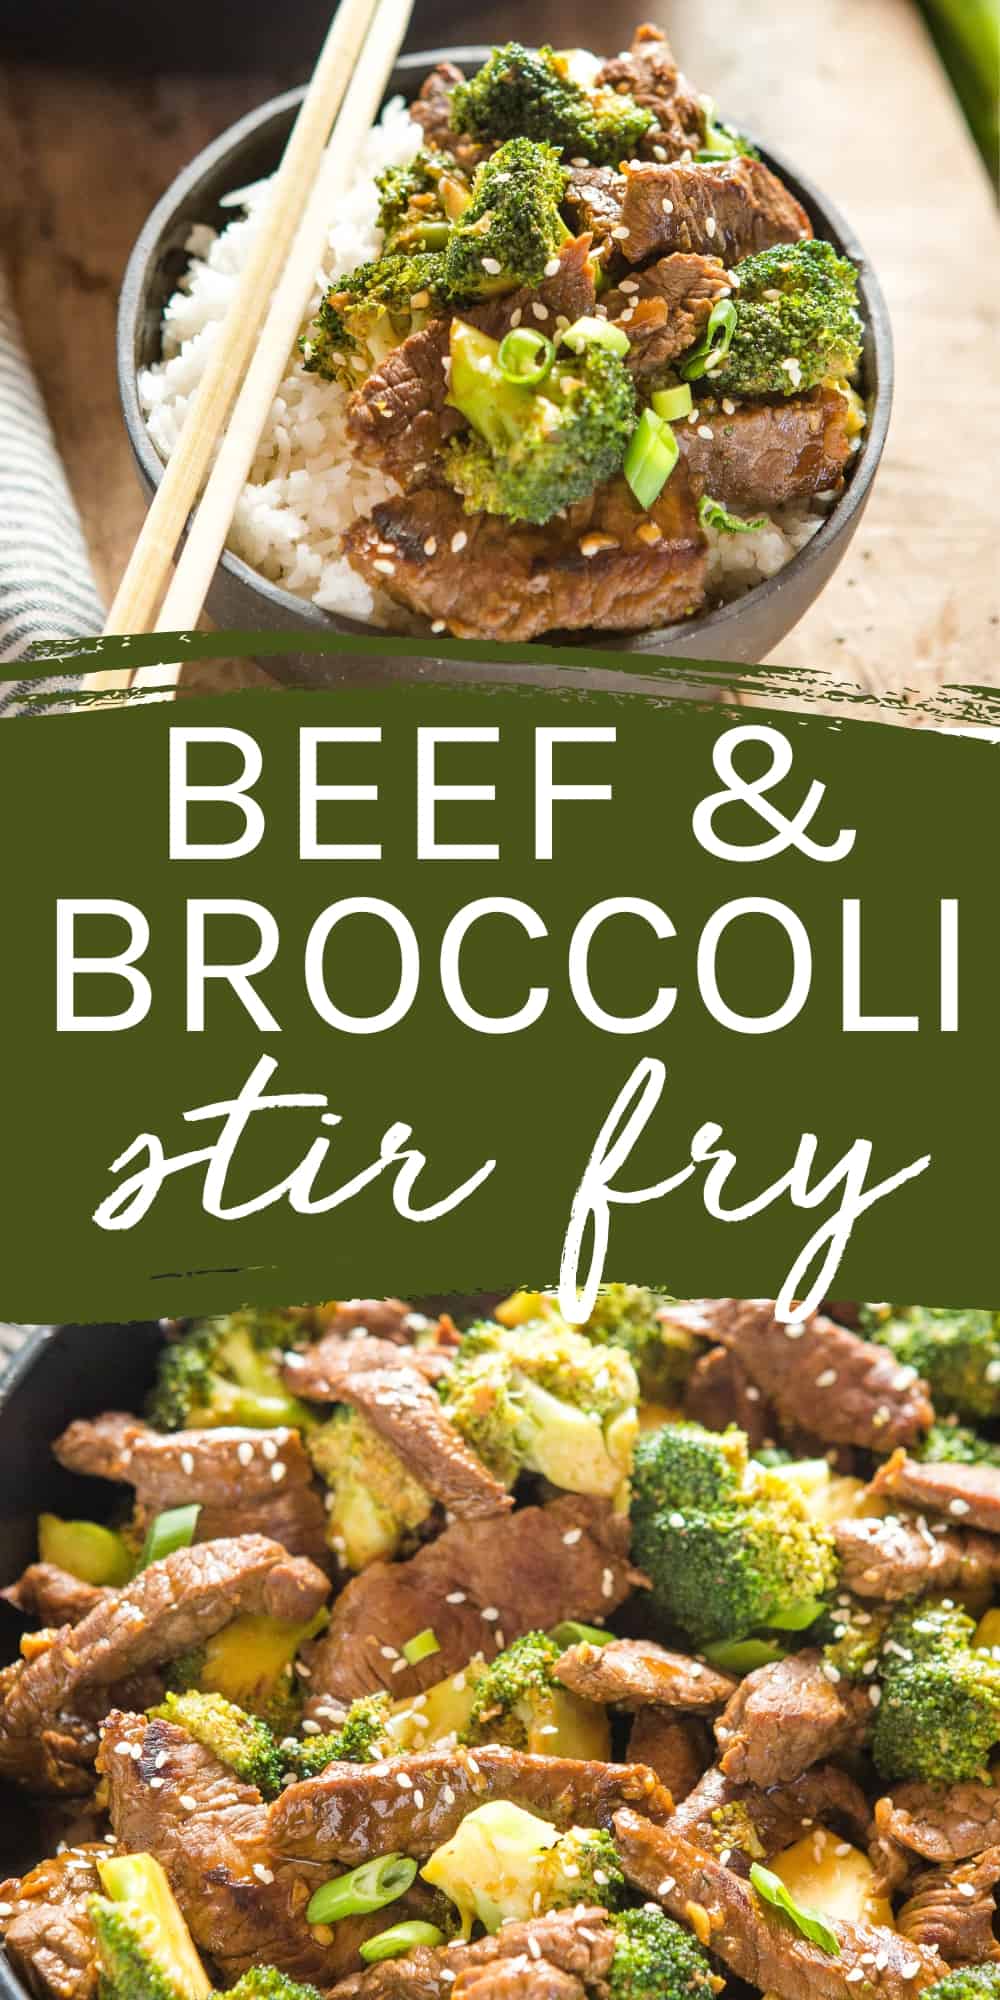 This Beef and Broccoli Stir Fry is an easy weeknight meal that's better than take-out! Tender beef & broccoli in a deliciously simple sauce! Recipe from thebusybaker.ca! #beefandbroccoli #takeout #takeaway #weeknightmeal #easymeal #familymeal #chinesetakeout #dinner #easydinner via @busybakerblog